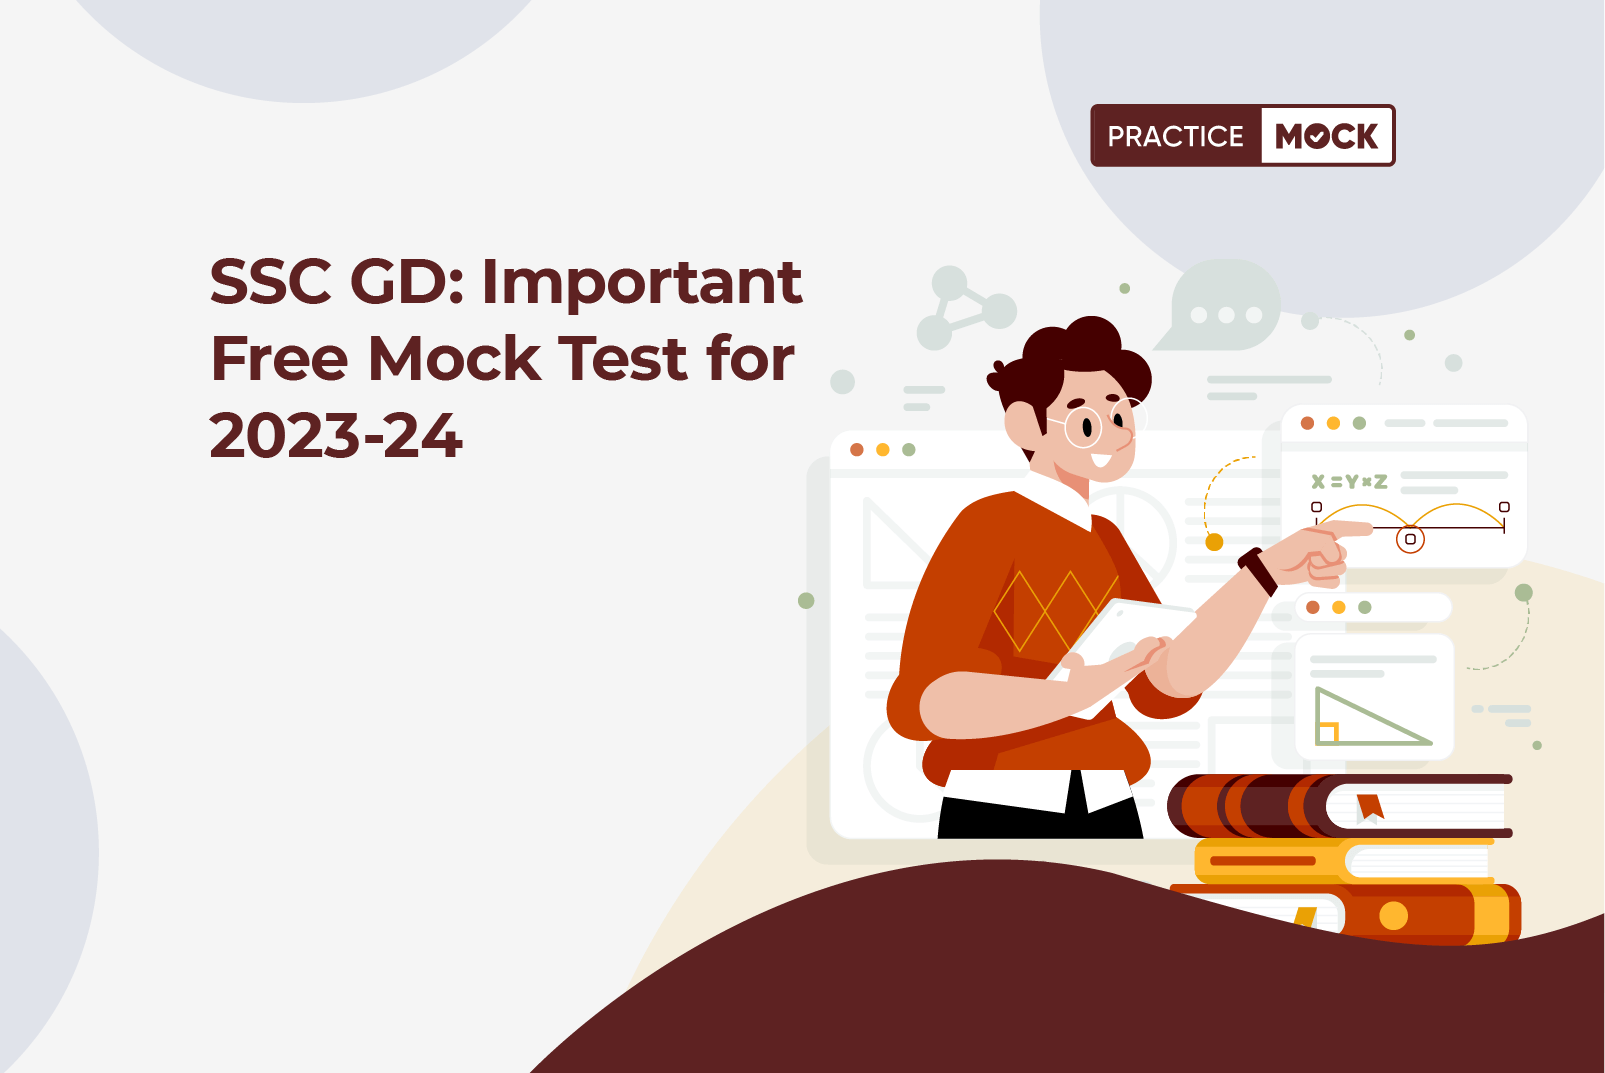 SSC GD Important Free Mock Test for 2023-24